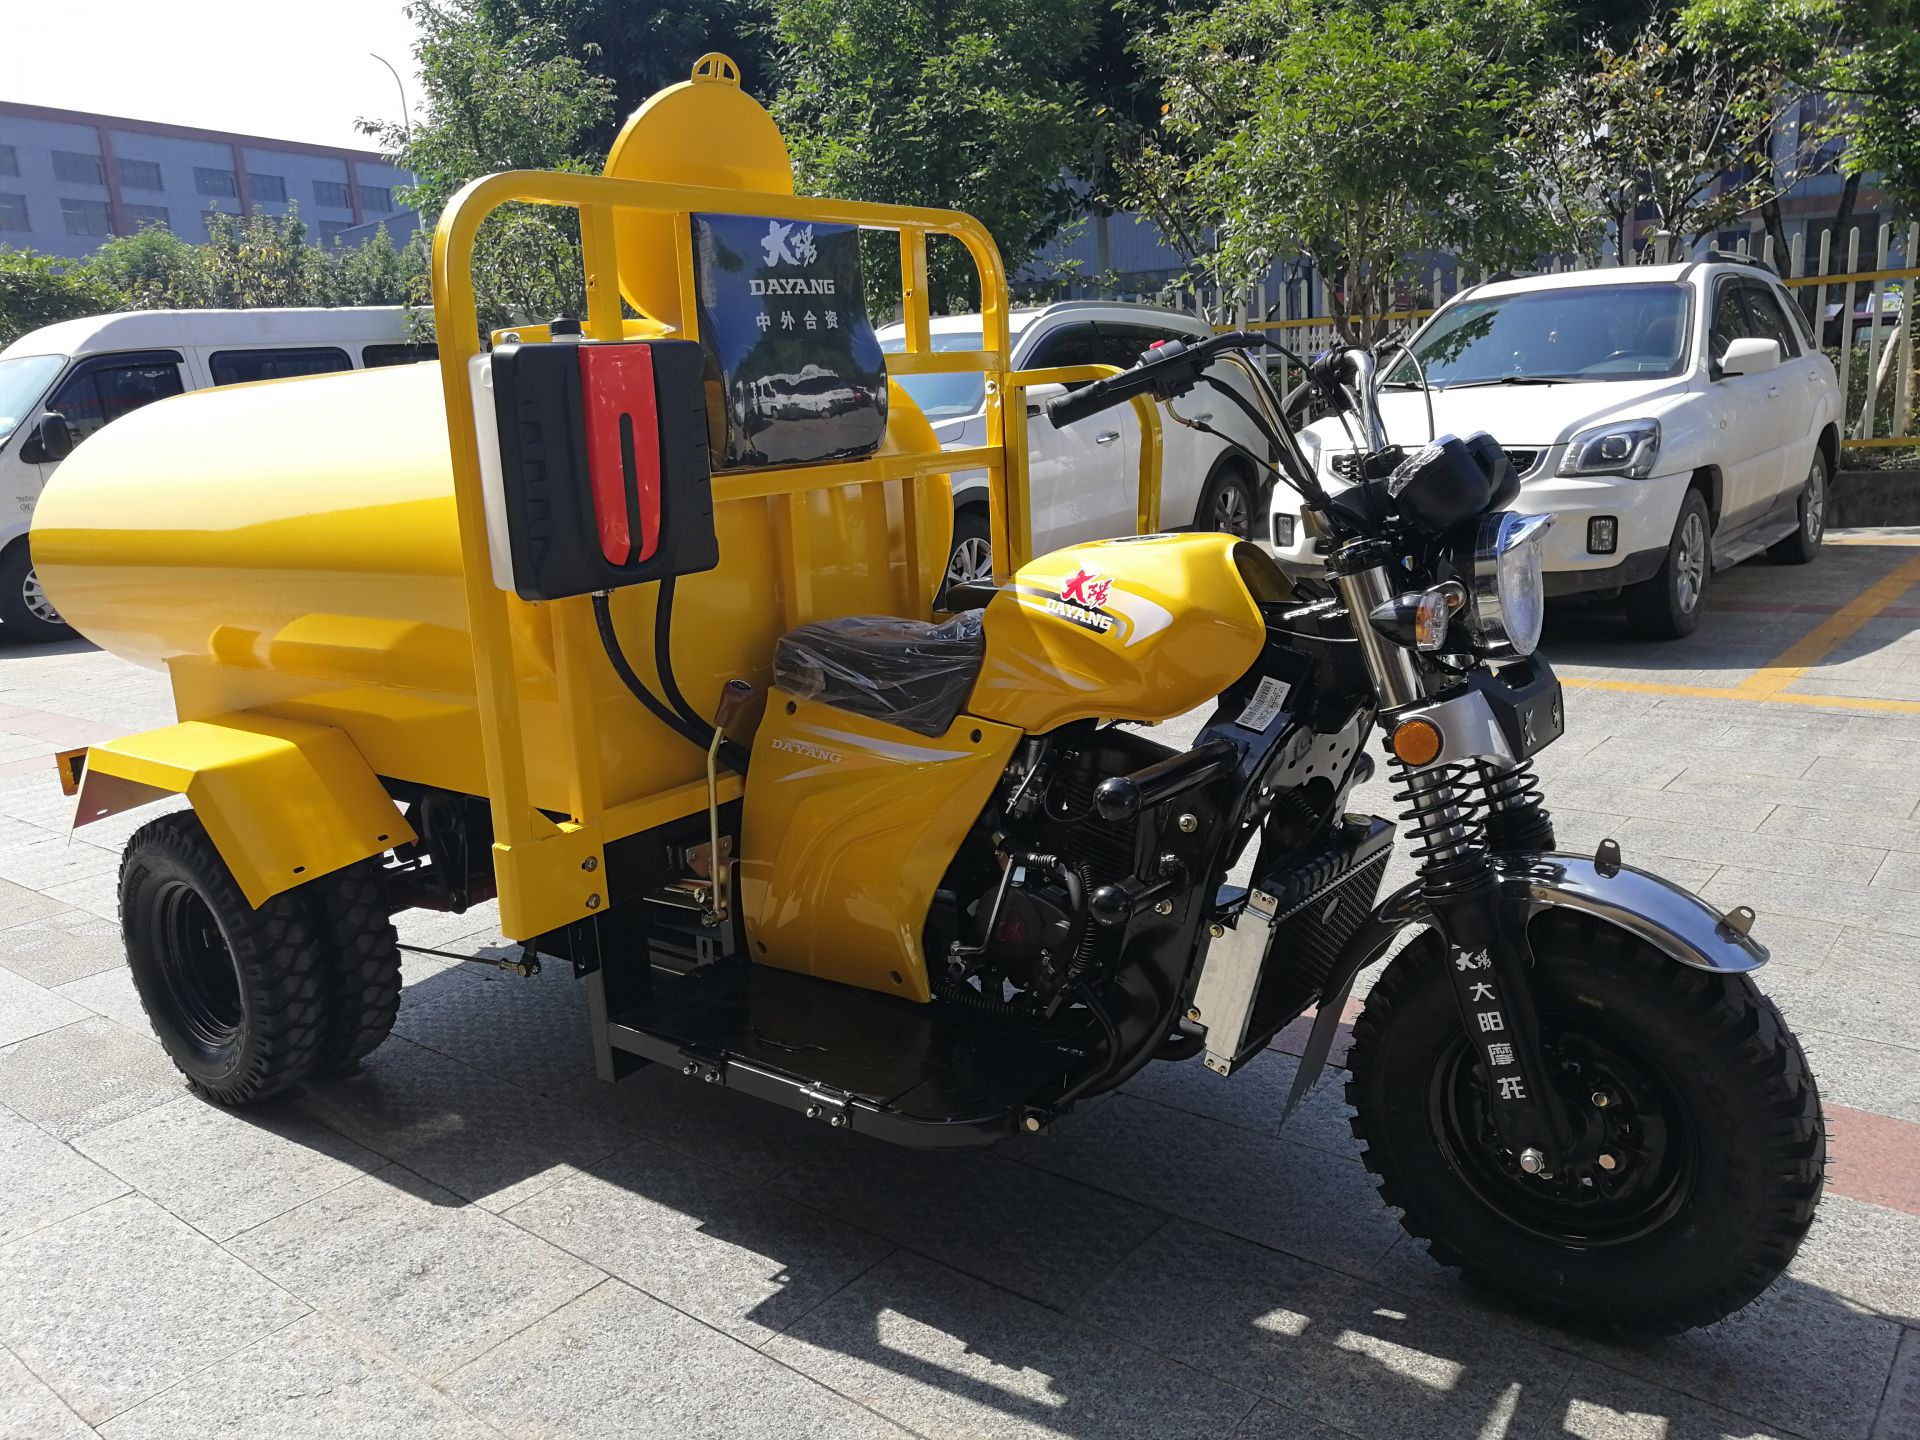 DW-1 Motorized gas powered oil tank/water tank tricycle/cargo tricycle for sale